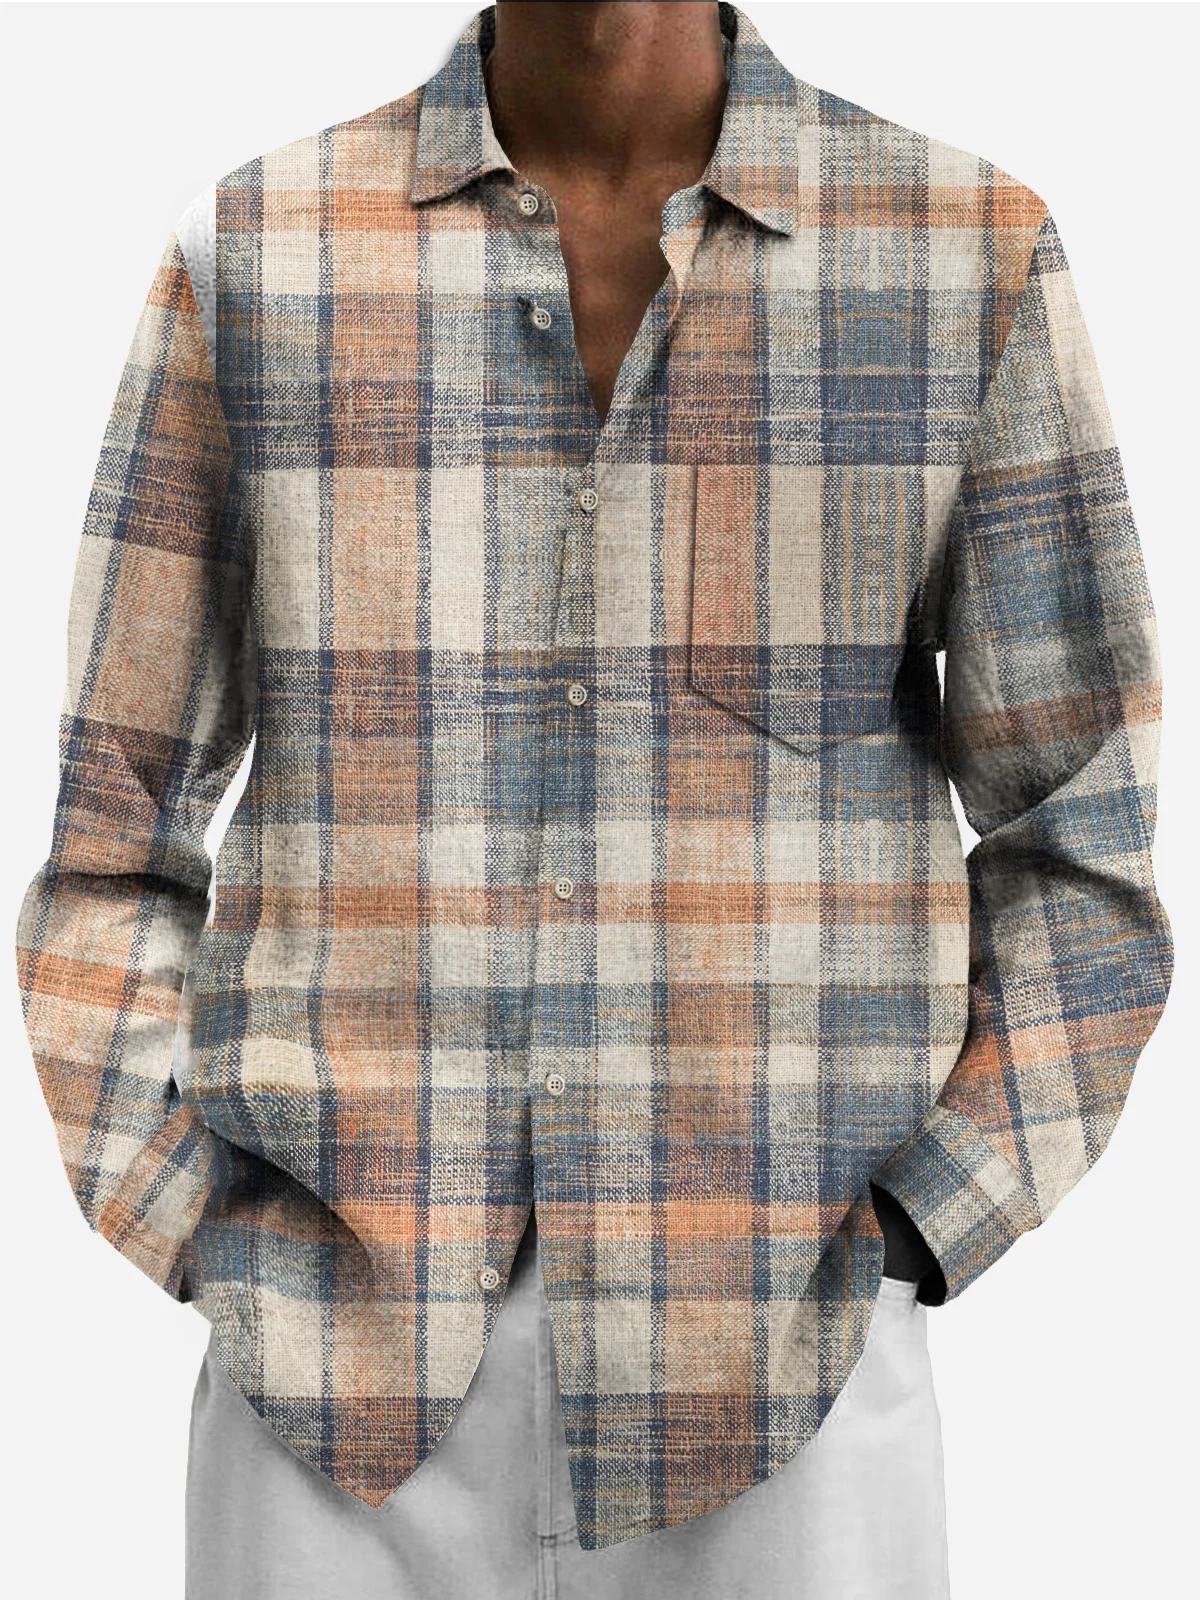 Royaura Vintage Light Gray Stand Collar Plaid Men's Long Sleeve Shirts Breathable and Comfortable Pocket Camp Button-Down Shirts